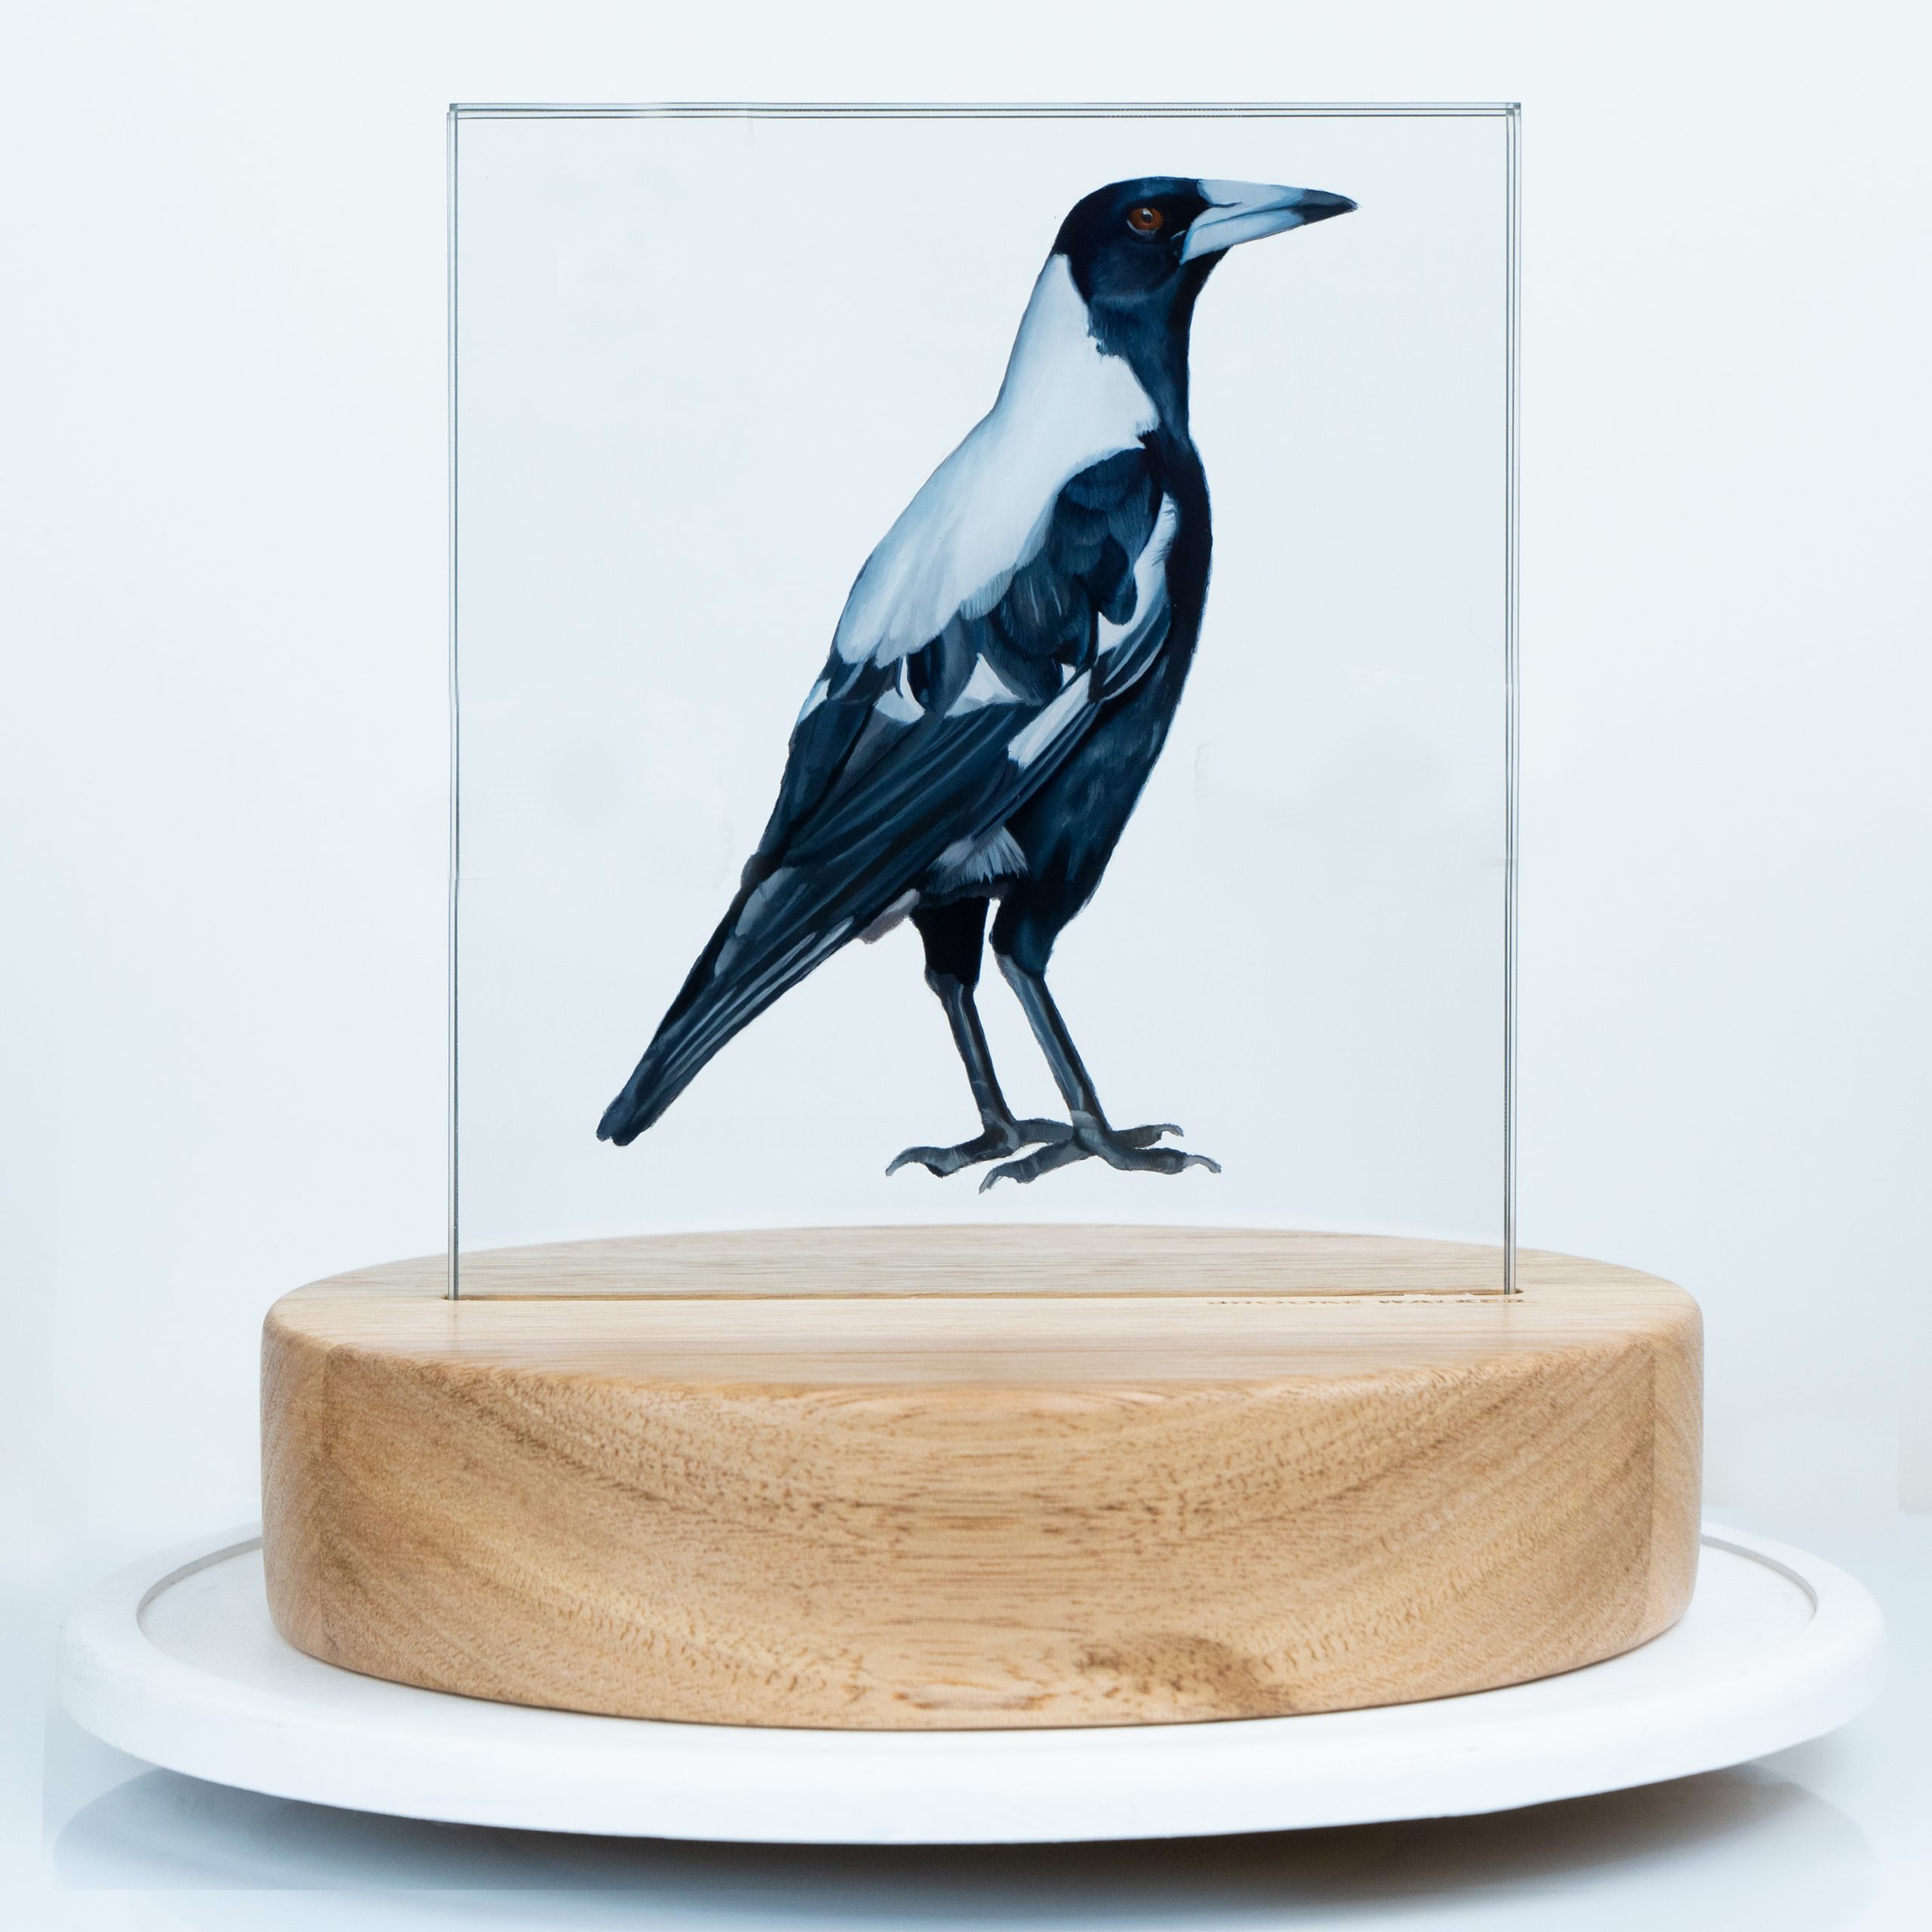 Magpie painted on oil in reverse on 4mm super clear glass